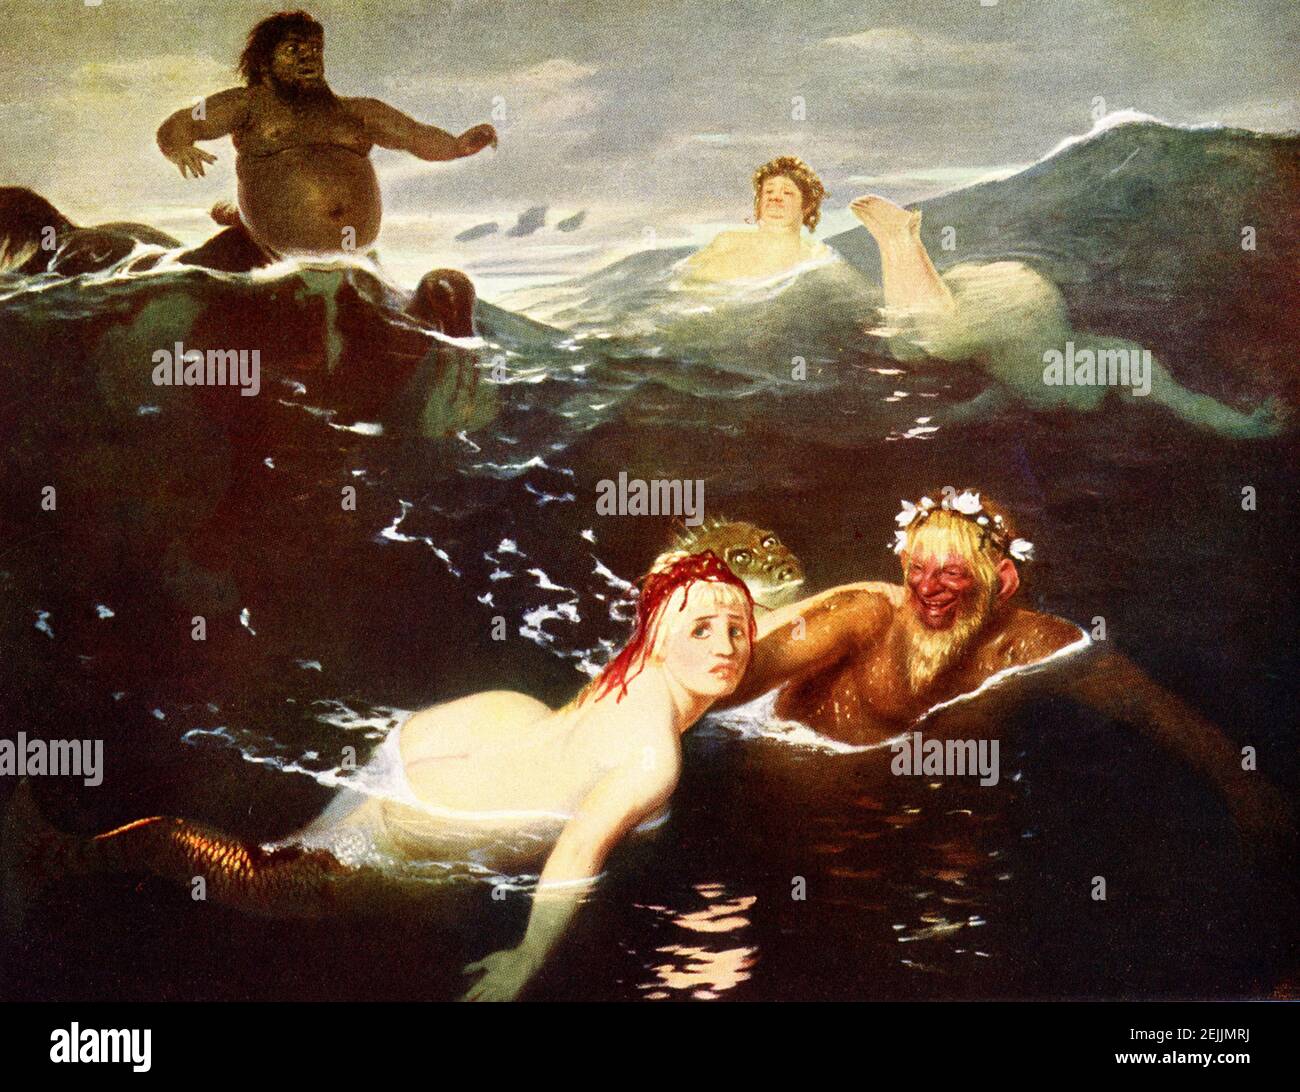 This images shows Spiel der Wellen  (Playing in the Waves) by Arnold Bocklin, housed in the Neue Pinokothek in Munich, Germany. It was created in 1883. A rather ordinary episode in the artist’s life appears to have provided the immediate inspiration for this composition. Böcklin had been swimming in Italy with the family of Anton Dohrn, the zoologist who commissioned Hans von Marées’s Oarsmen. Dohrn dove into the waves, swam some distance underwater, and suddenly resurfaced near the women in the bathing party. The ladies’ surprise caught Böcklin’s fancy, and he decided to portray a similar sce Stock Photo